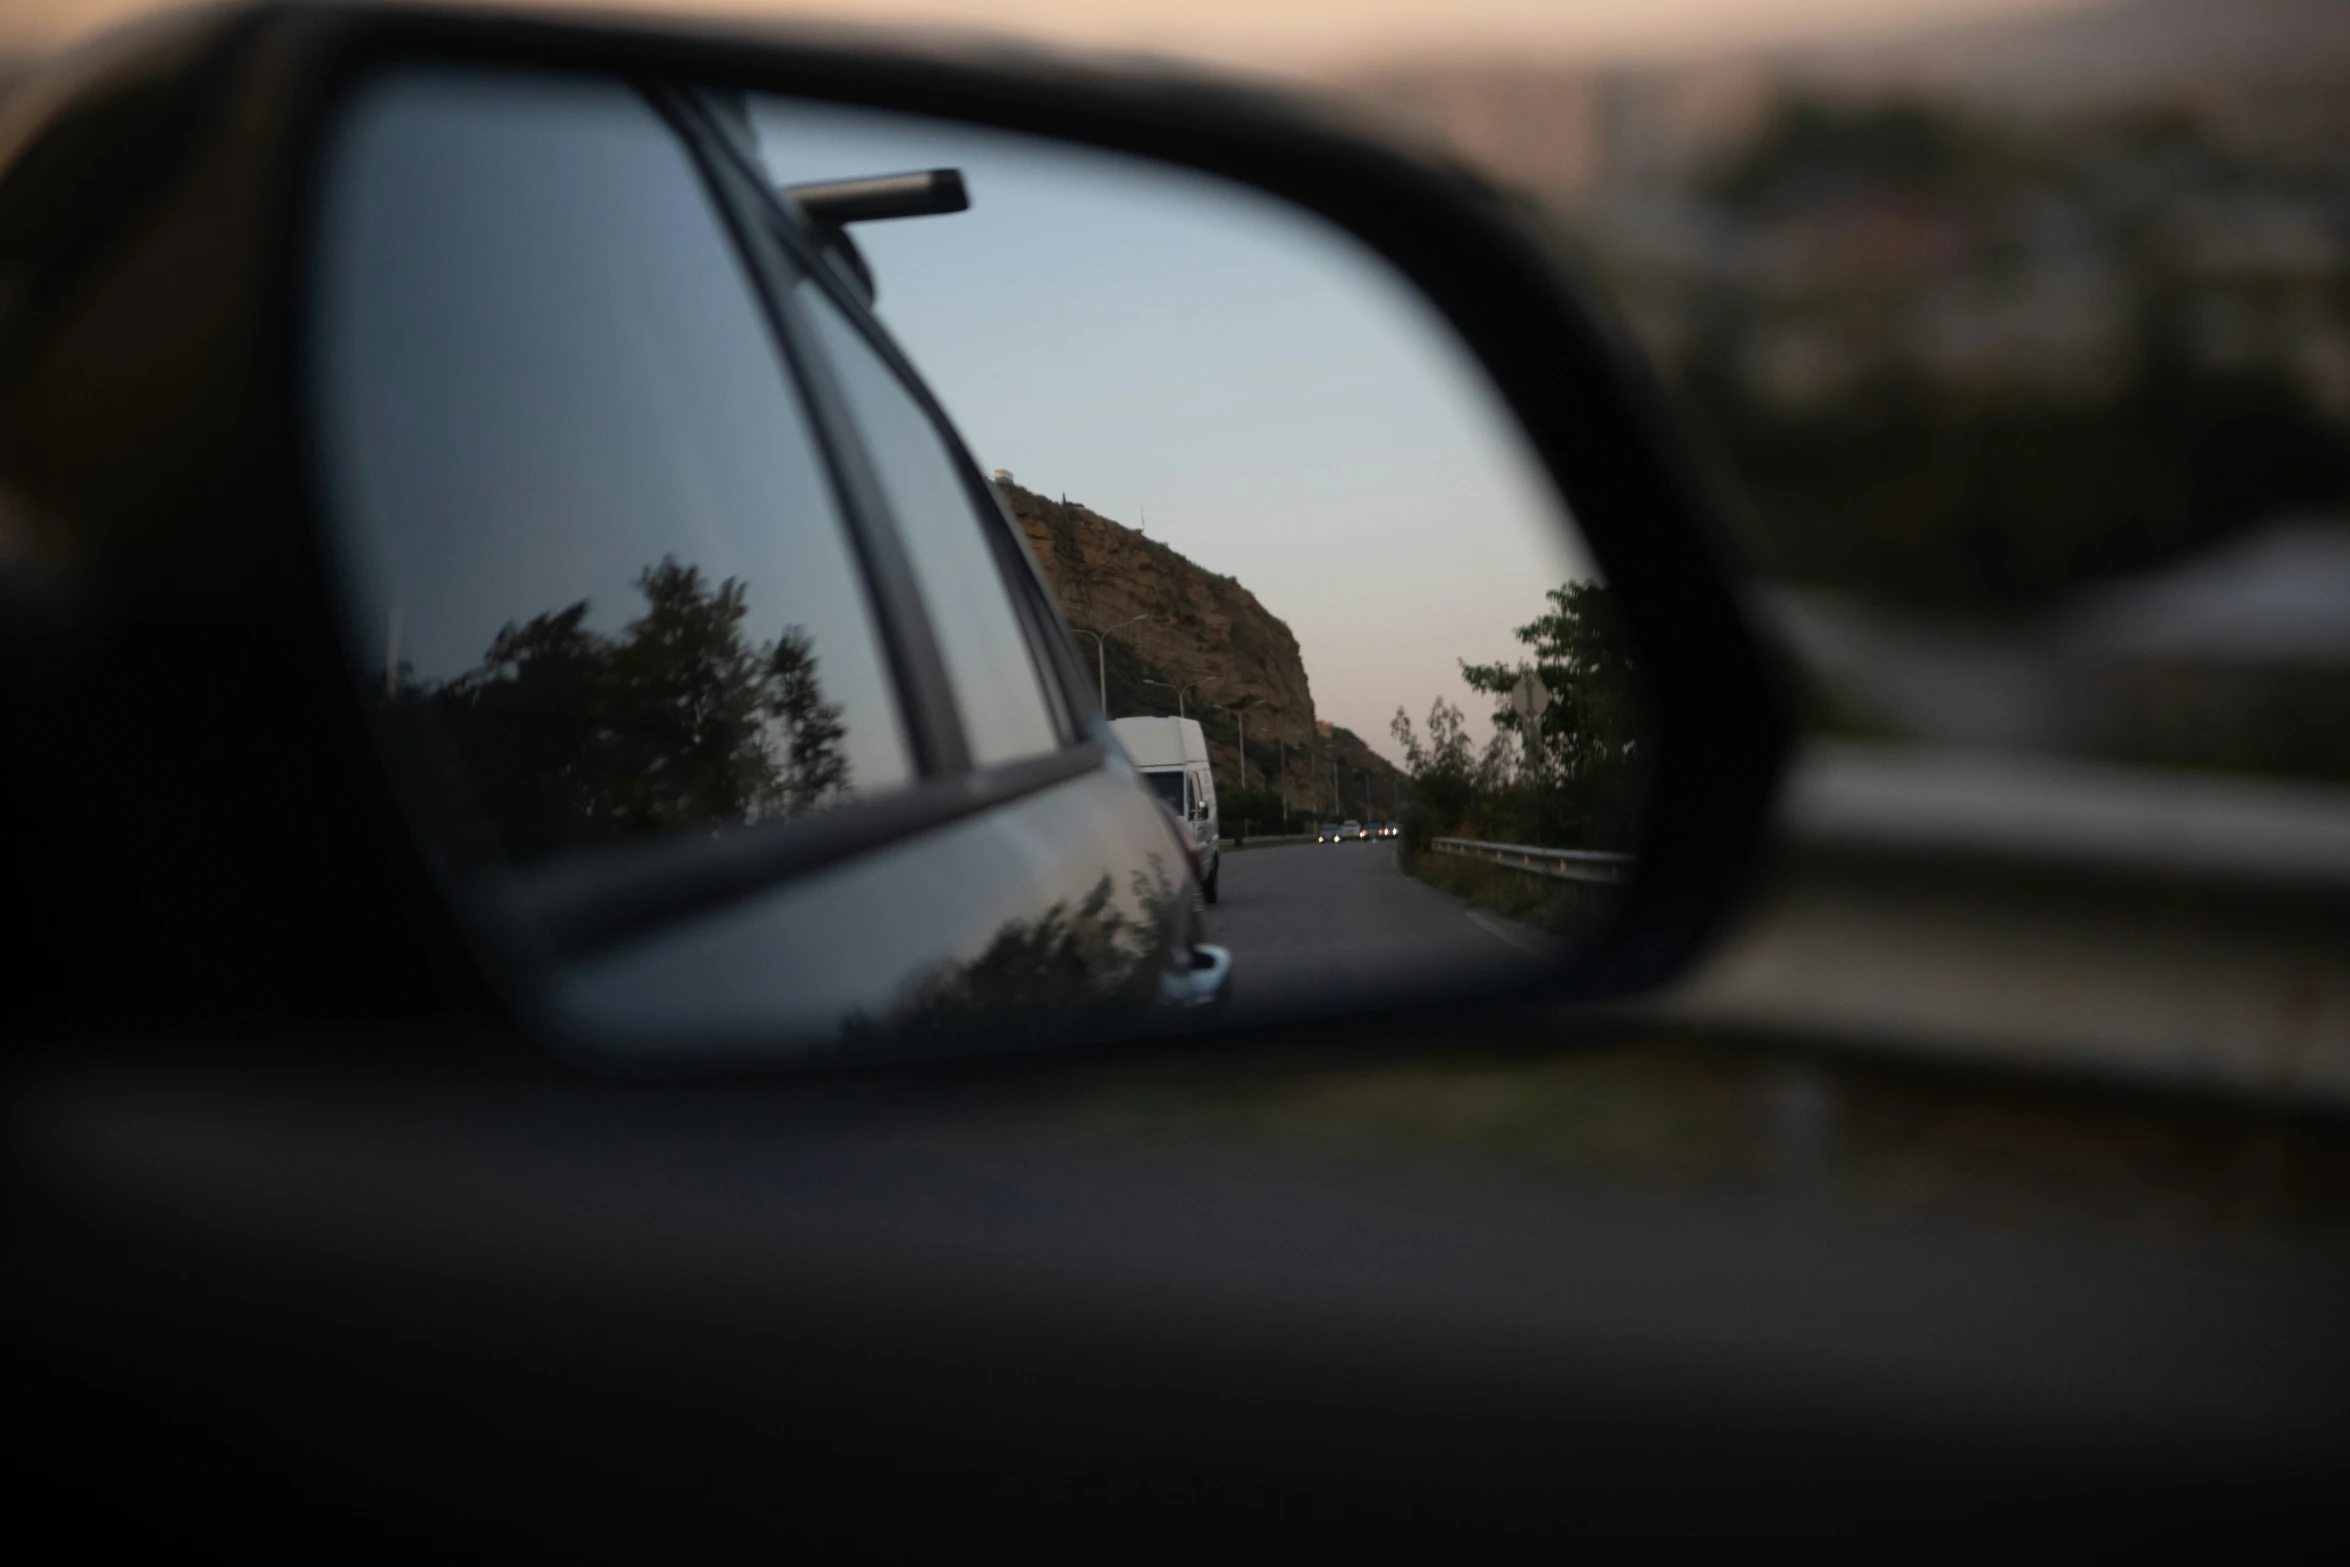 rear view mirror with a truck passing by